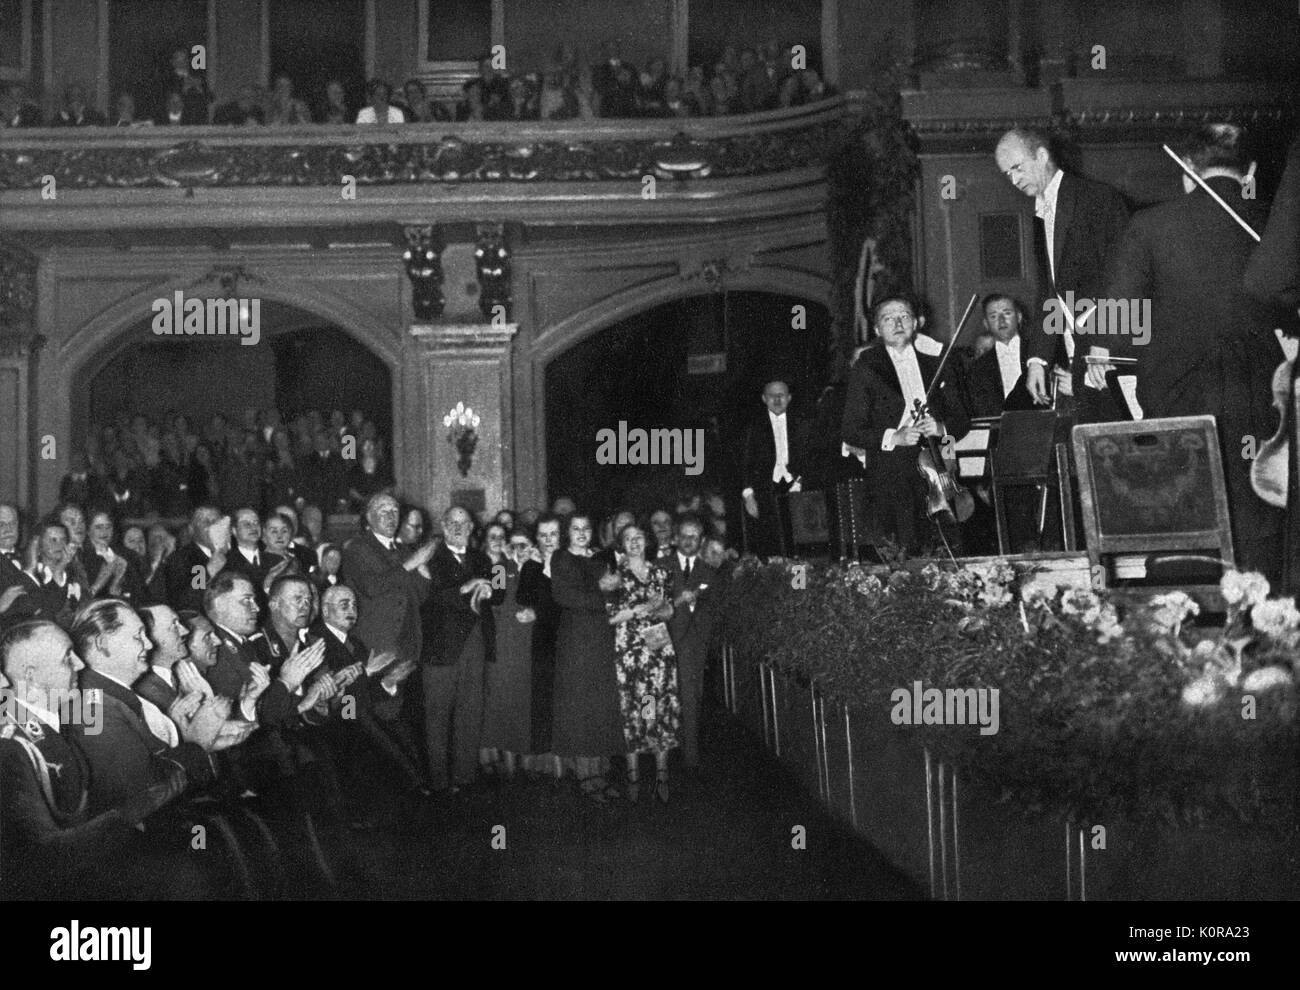 Wilhelm FURTWÄNGLER bowing  (on stage) & Hitler (in audience) clapping with his ministers during Third Reich. German conductor and composer 1886 - 1954.  Third Reich identifying with classical music culture. Stock Photo